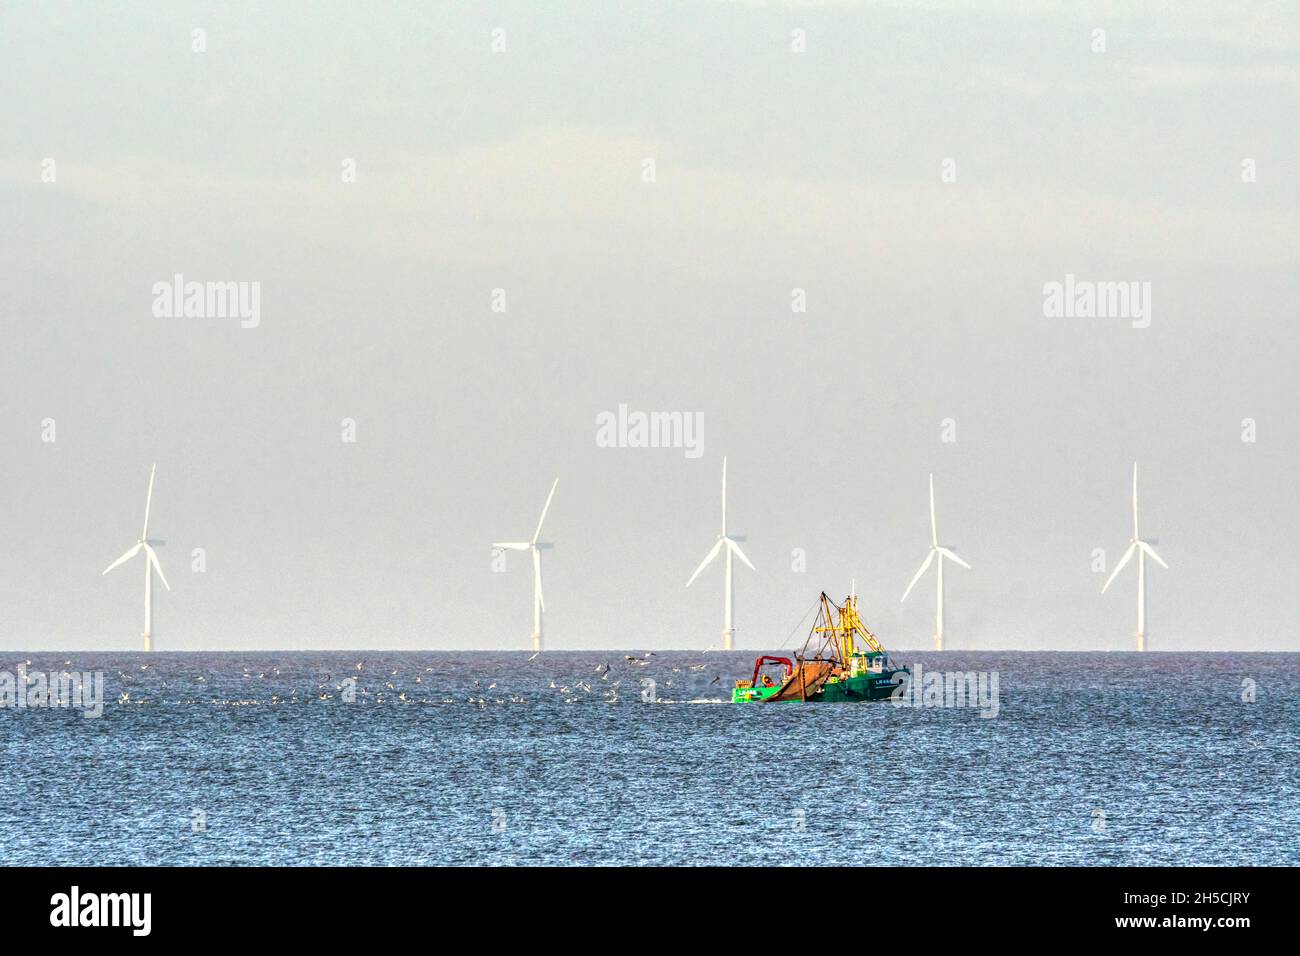 Trawler-dredger fishing boat Jolene of King's Lynn fishing in front of the Race Bank offshore wind farm.  Off the North Norfolk coast at Brancaster. Stock Photo